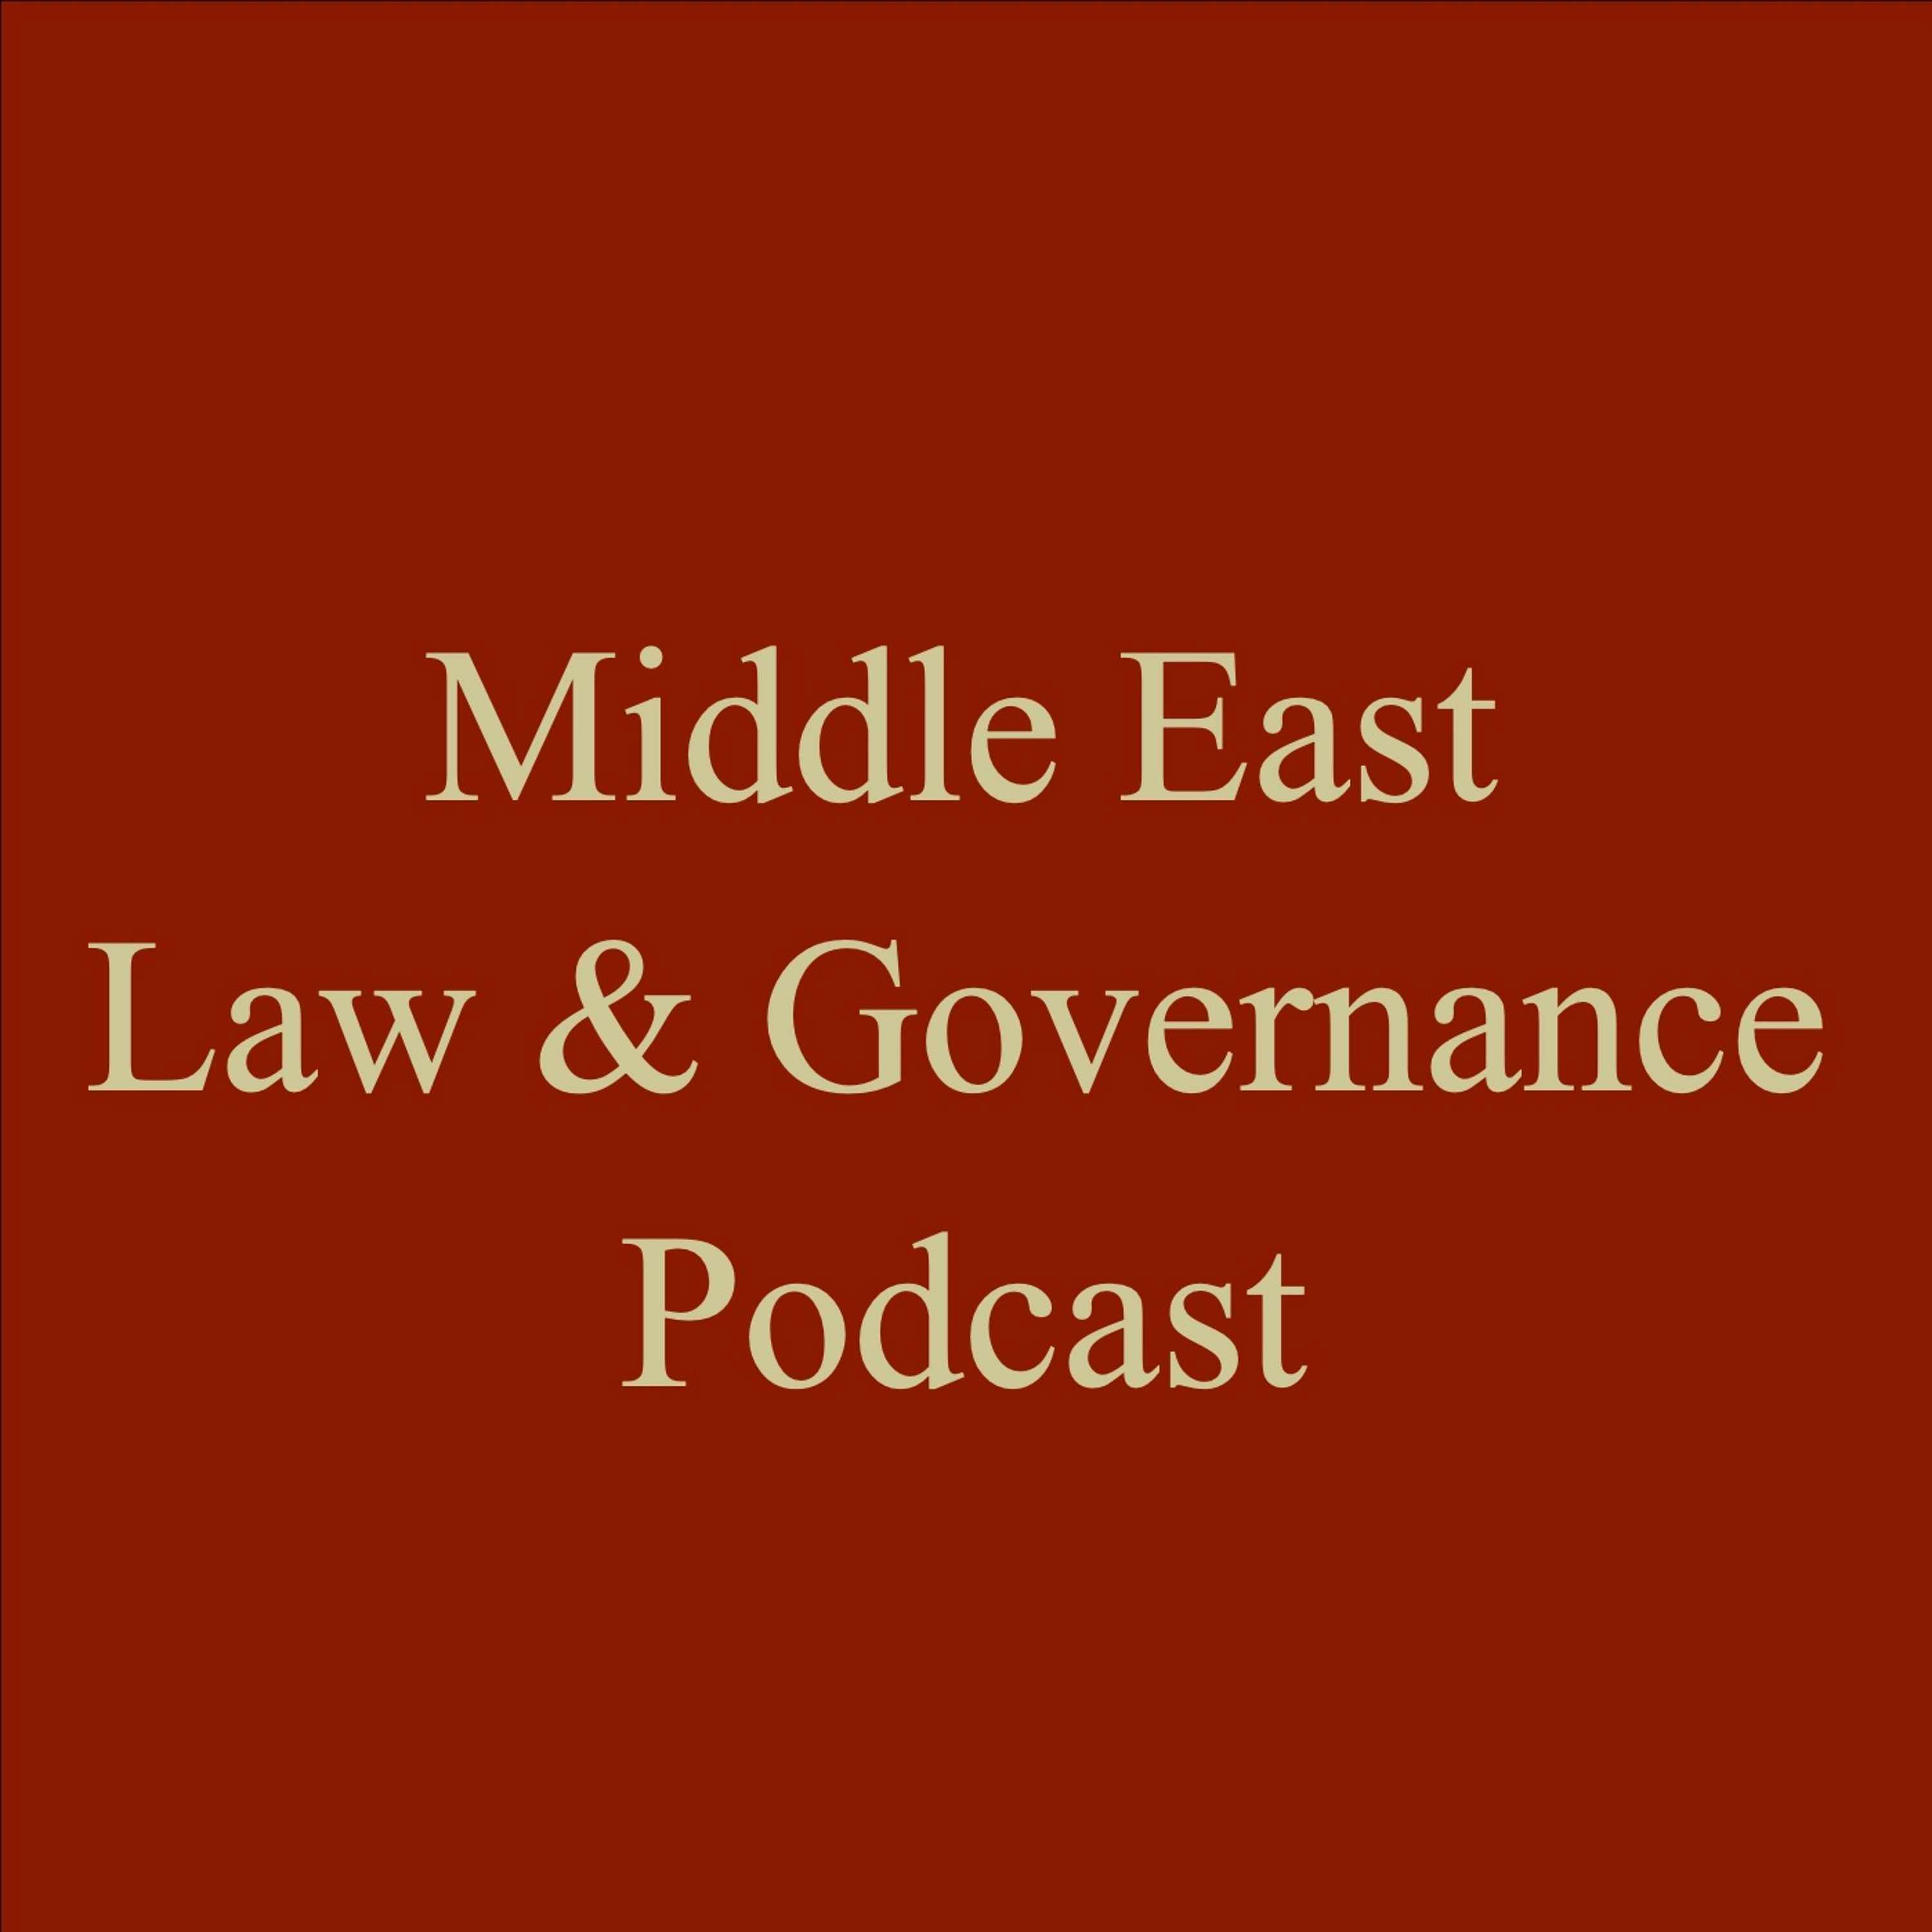 Episode 12 - The October 17 Protests in Lebanon with Dr Ibrahim Halawi & Dr Bassel Salloukh